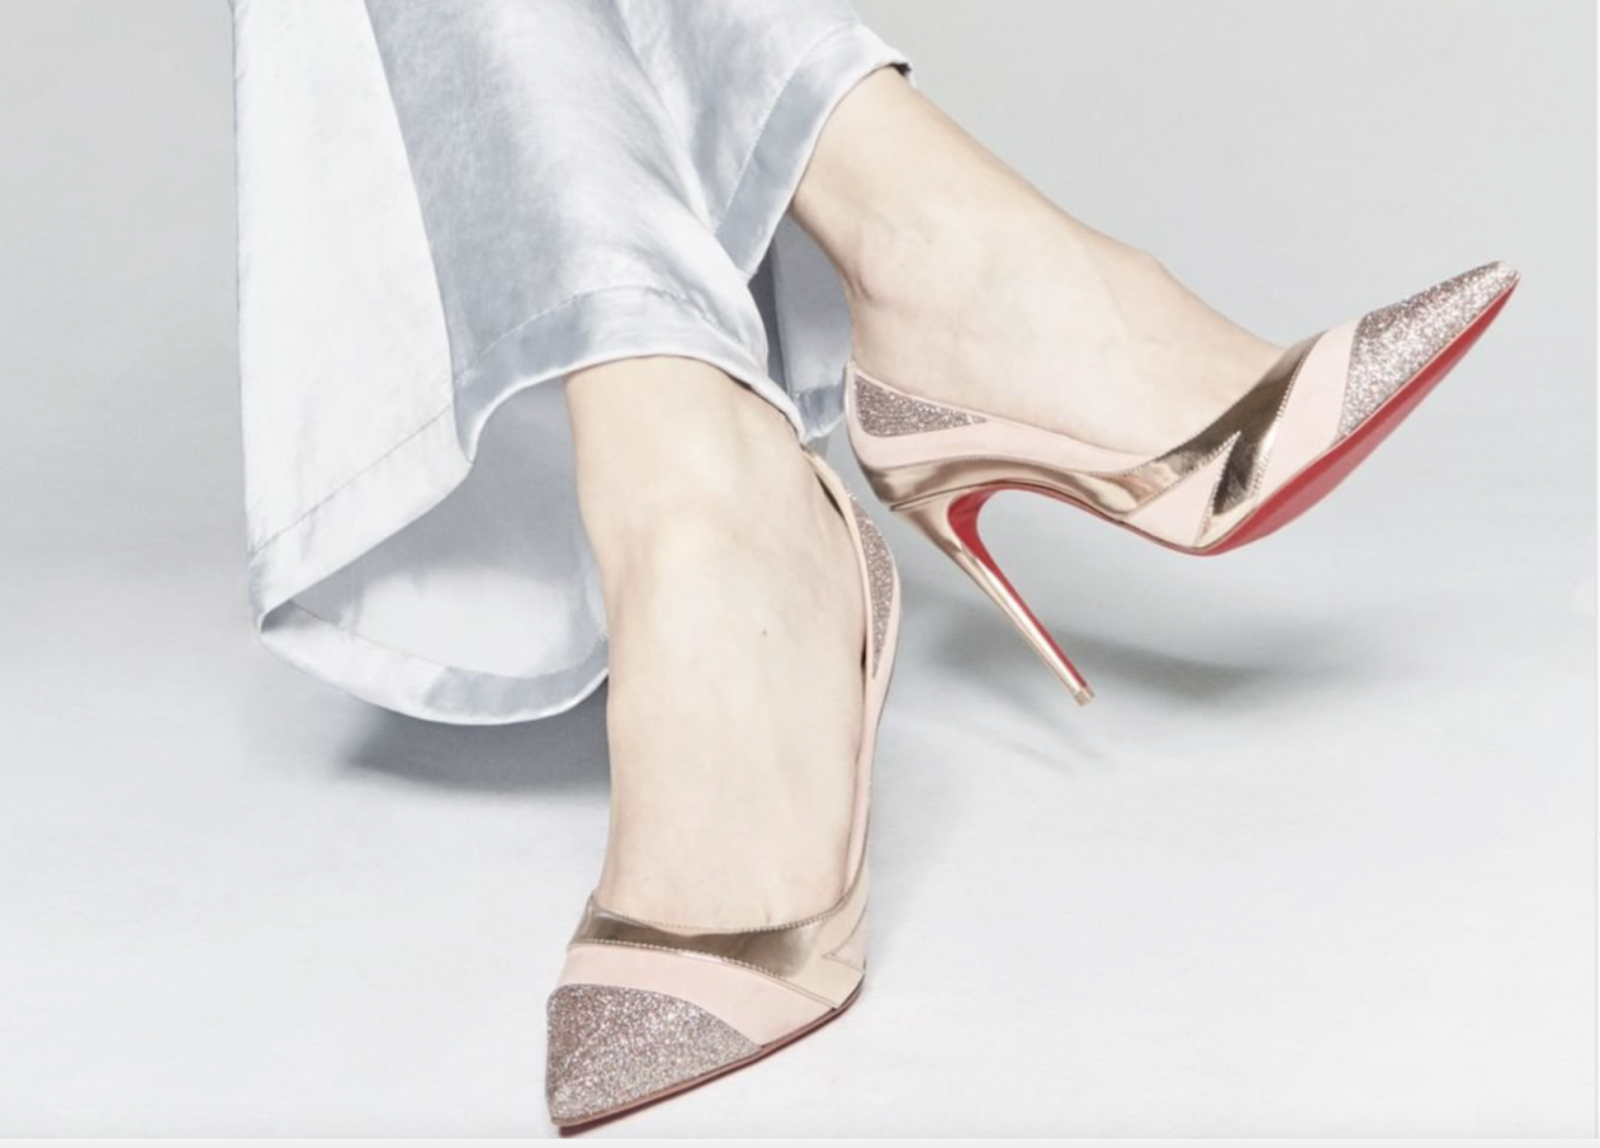 Louboutin Unsuccessful in Litigation over Red Soles – MARKS IP LAW